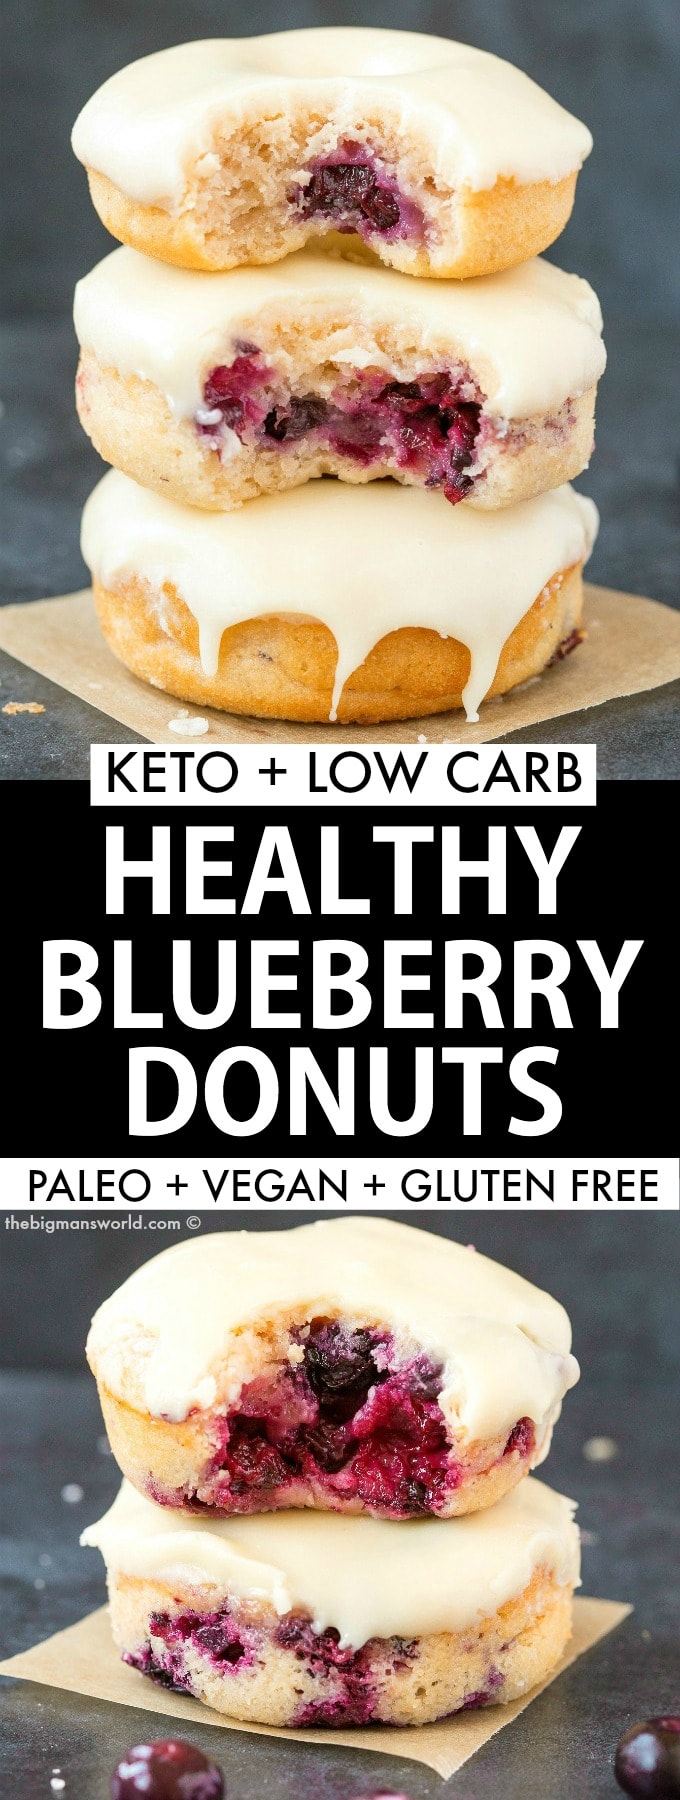 Easy baked blueberry donuts recipe made without yeast- paleo and vegan!